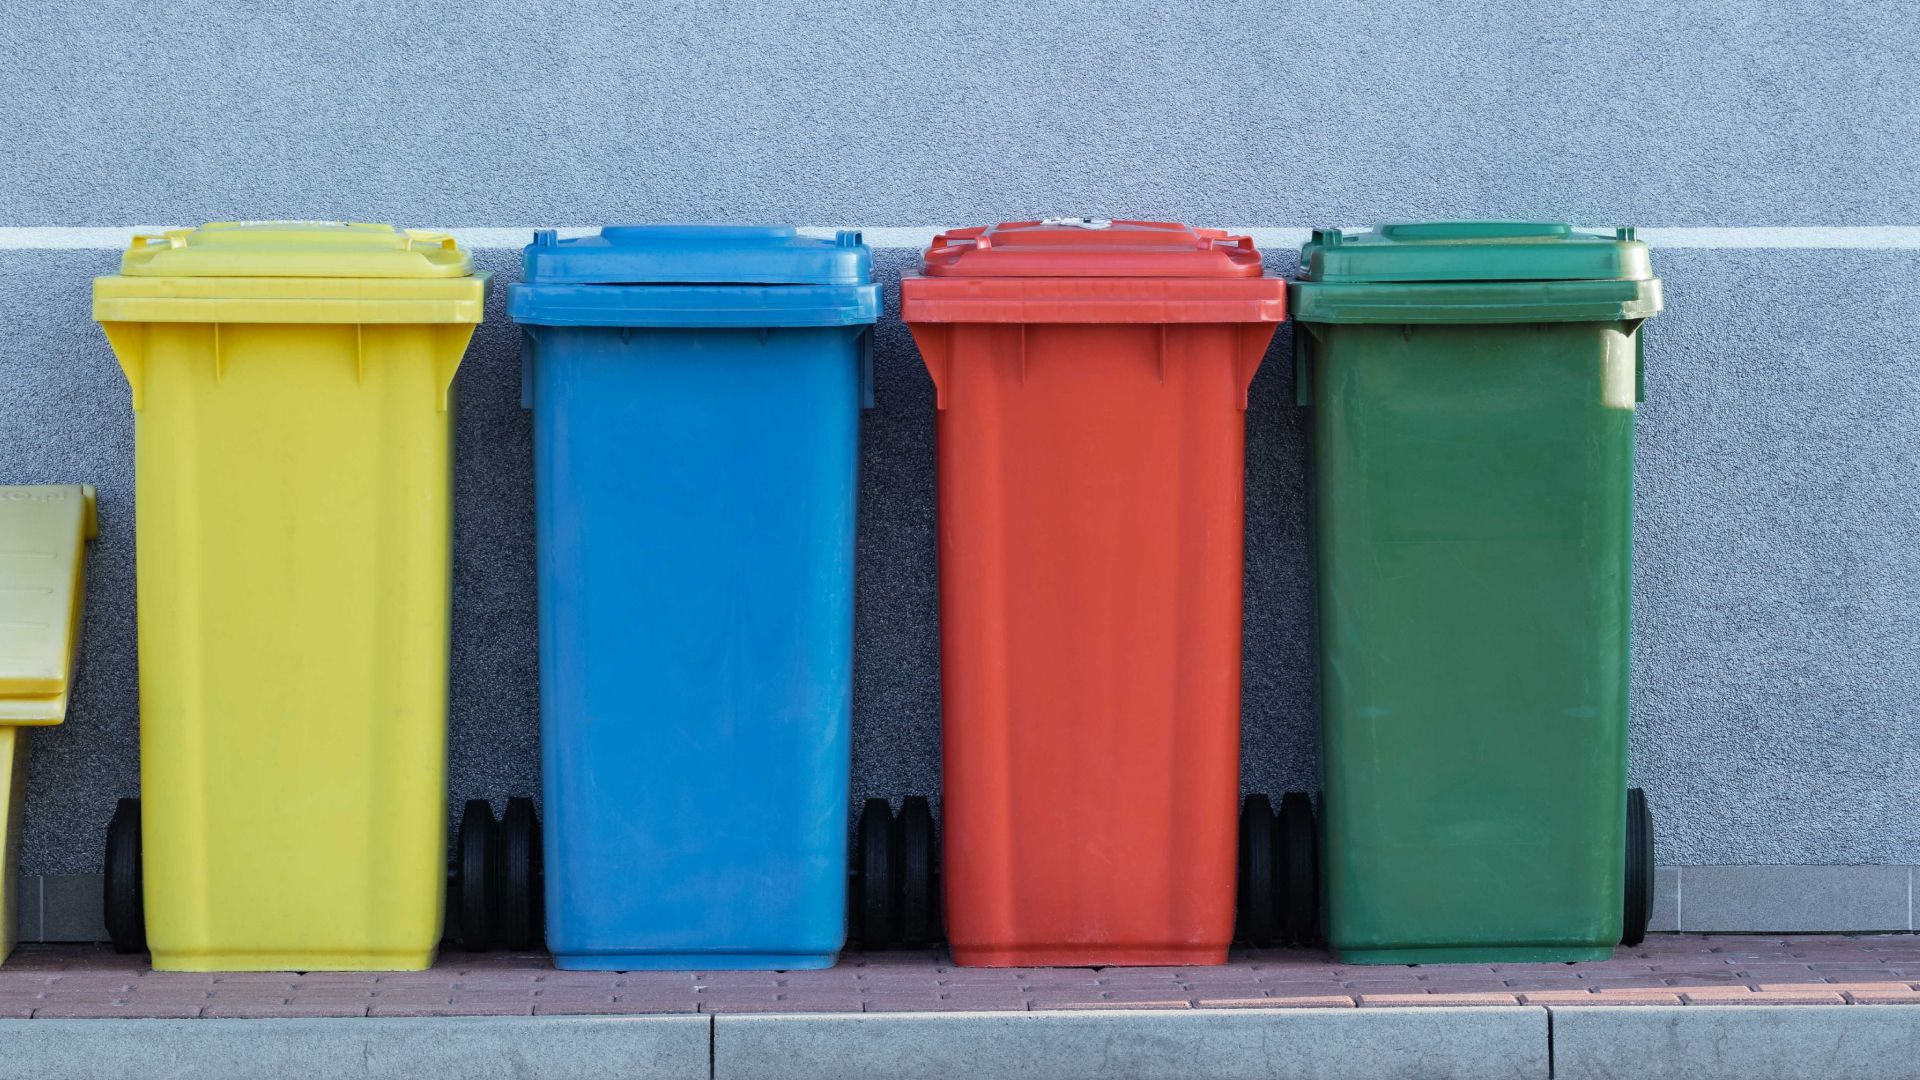 Yellow, blue, red and green bins in a row along a sidewalk.